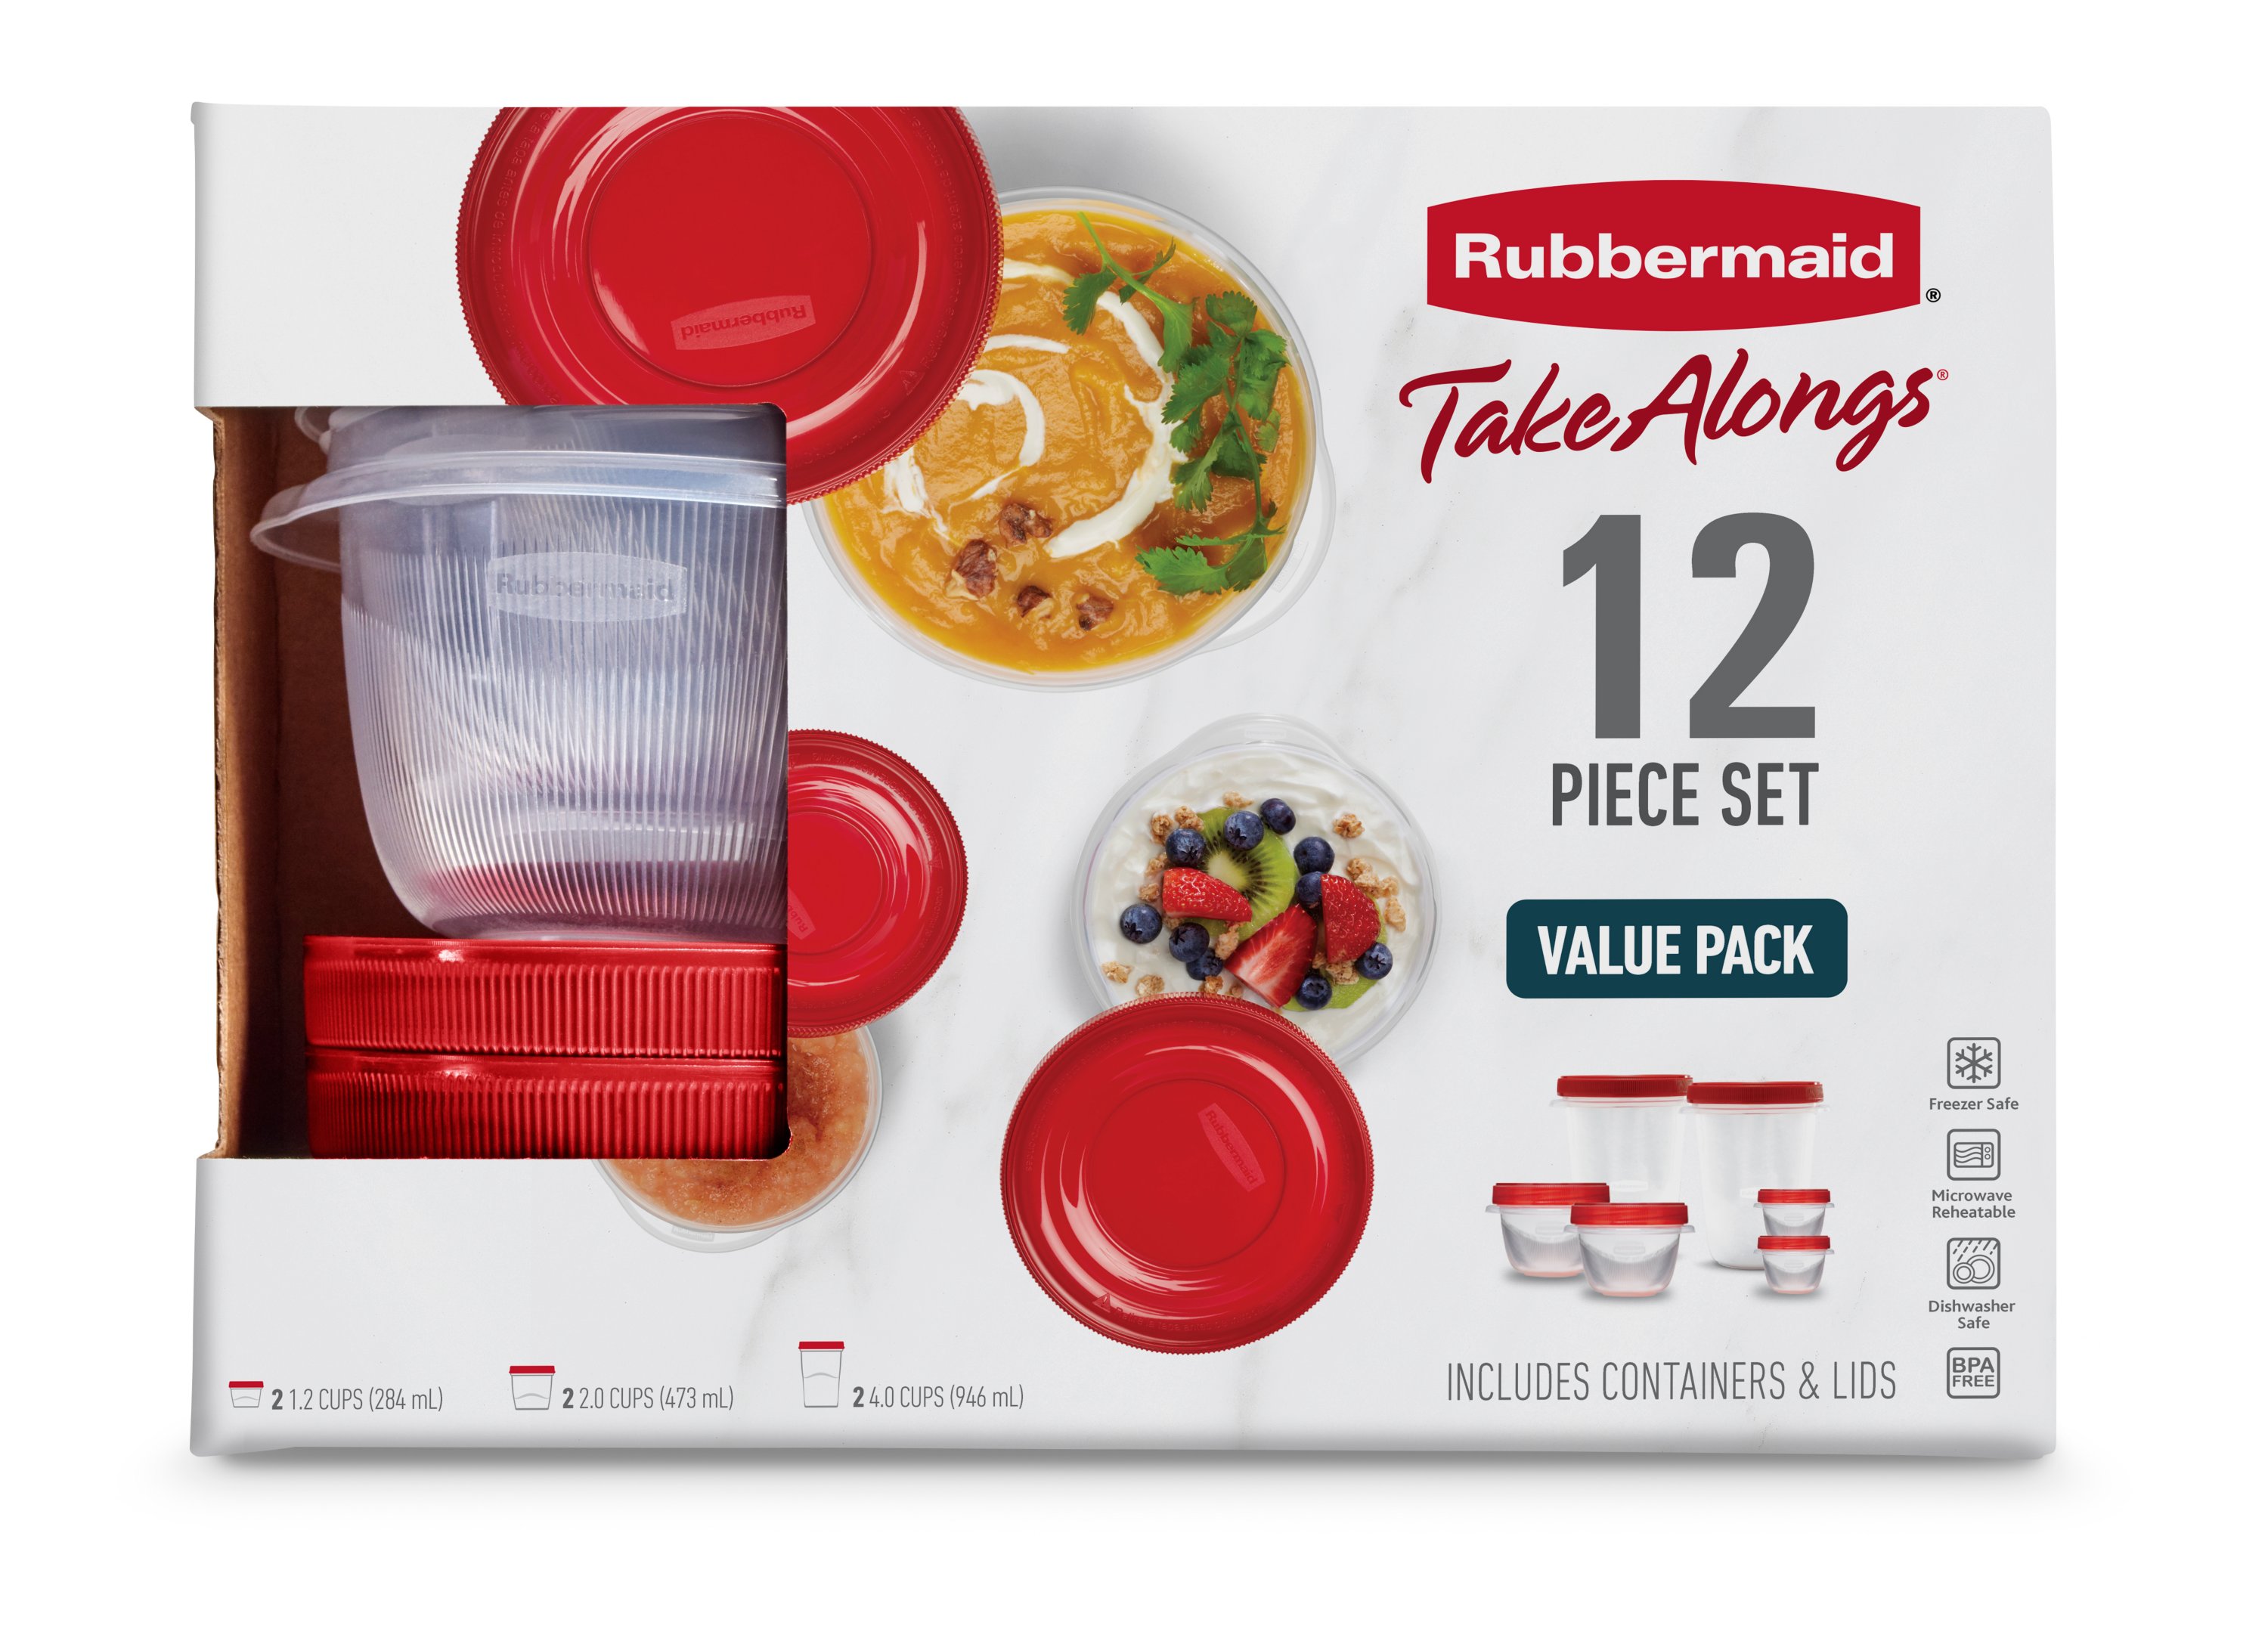 https://s7d9.scene7.com/is/image/NewellRubbermaid/2117372-rubbermaid-food-storage-12pc-ruby-red-lid-in-pack-straight-on